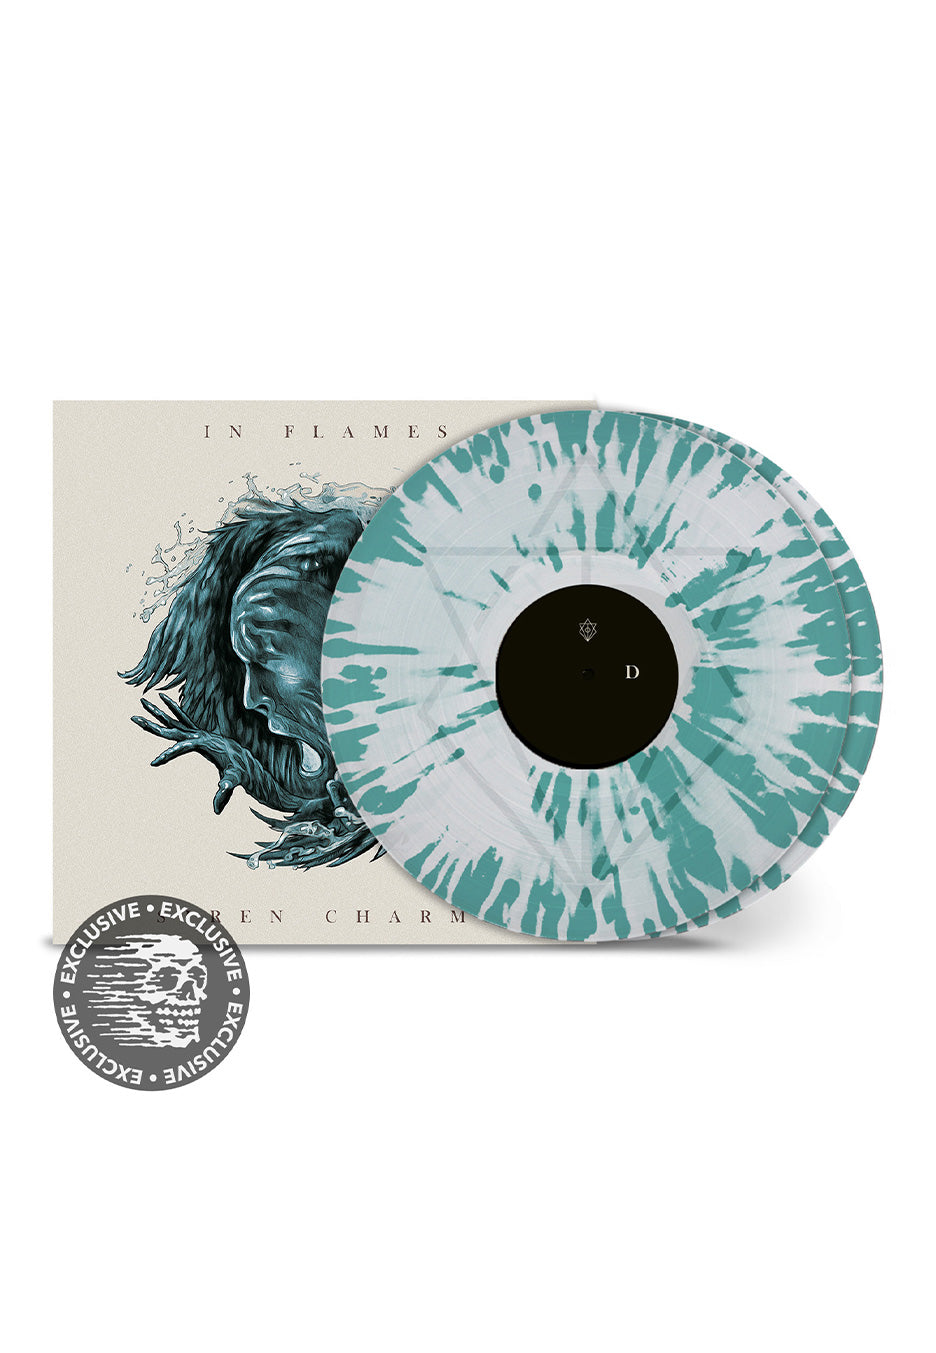 In Flames - Siren Charms (10th Anniversary) Ltd. Crystal Clear/Turquoise  - Splatter 2 Vinyl